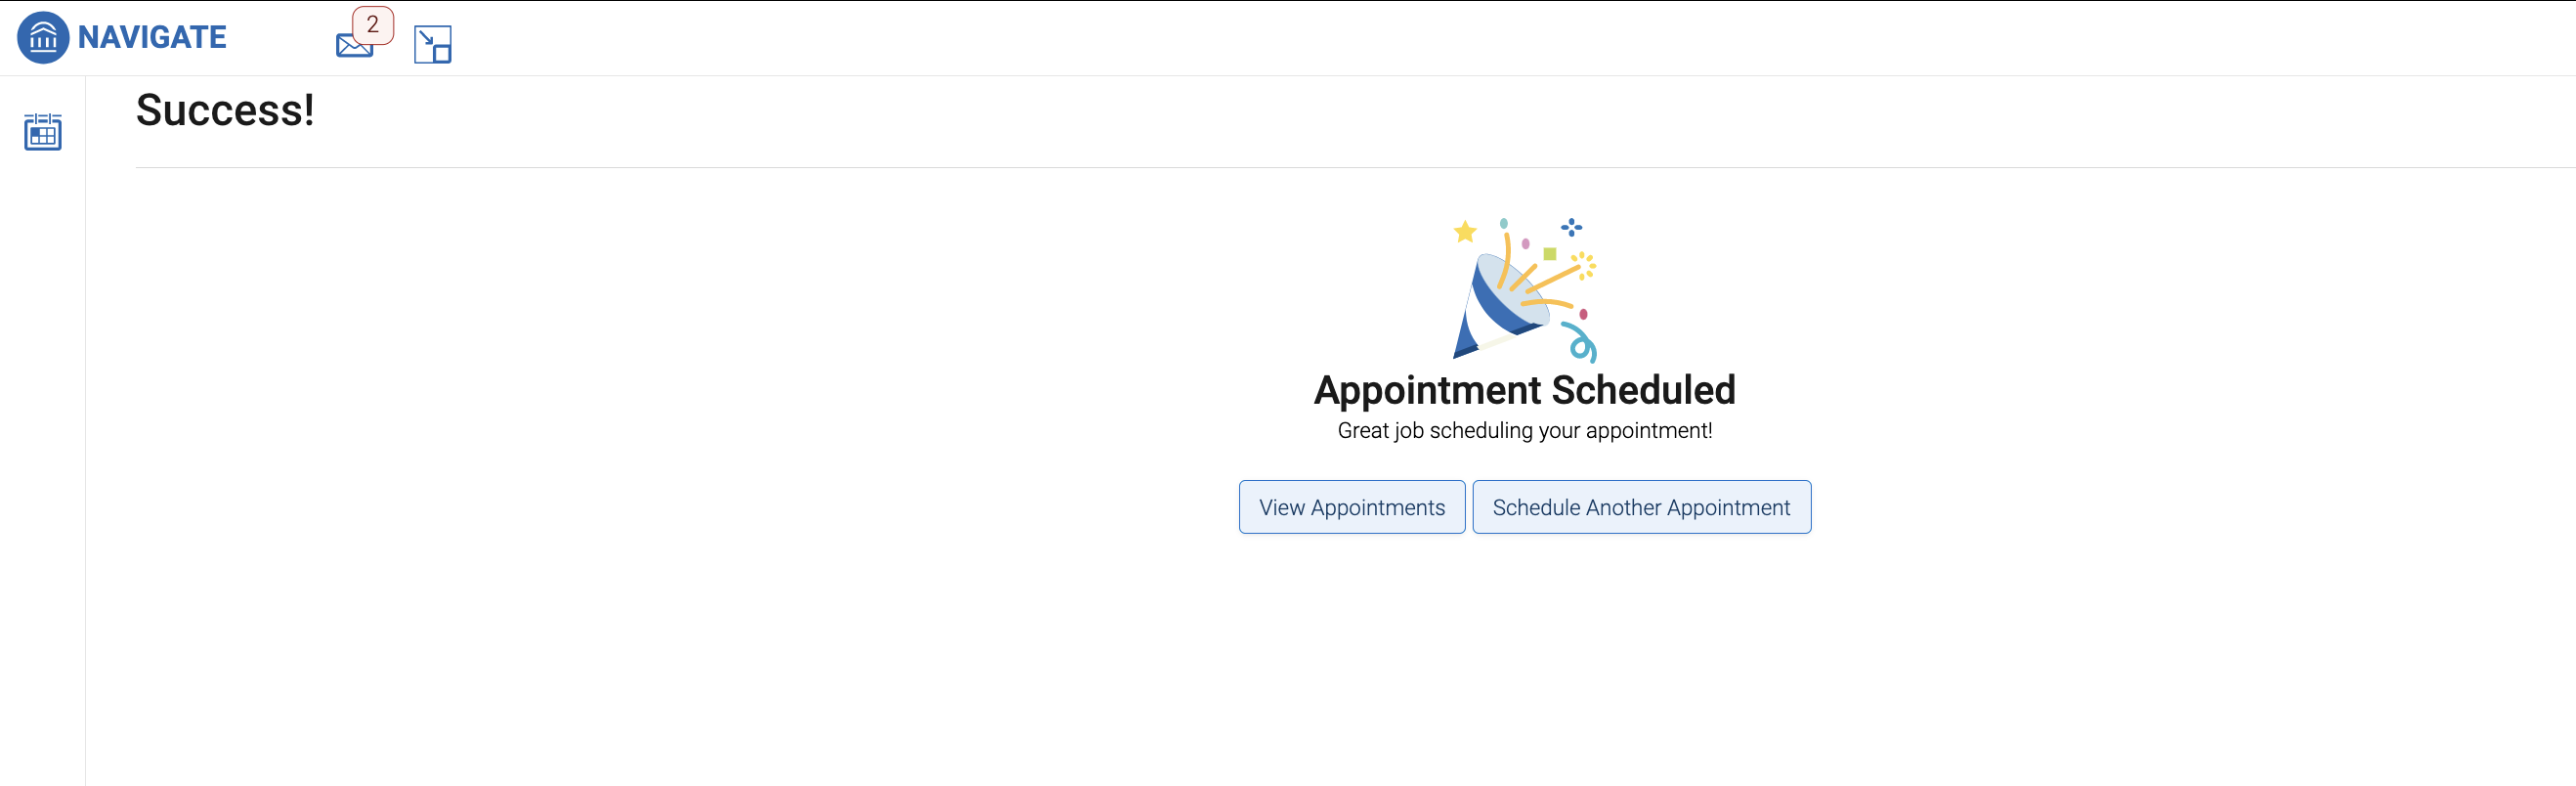 Appointment Scheduled